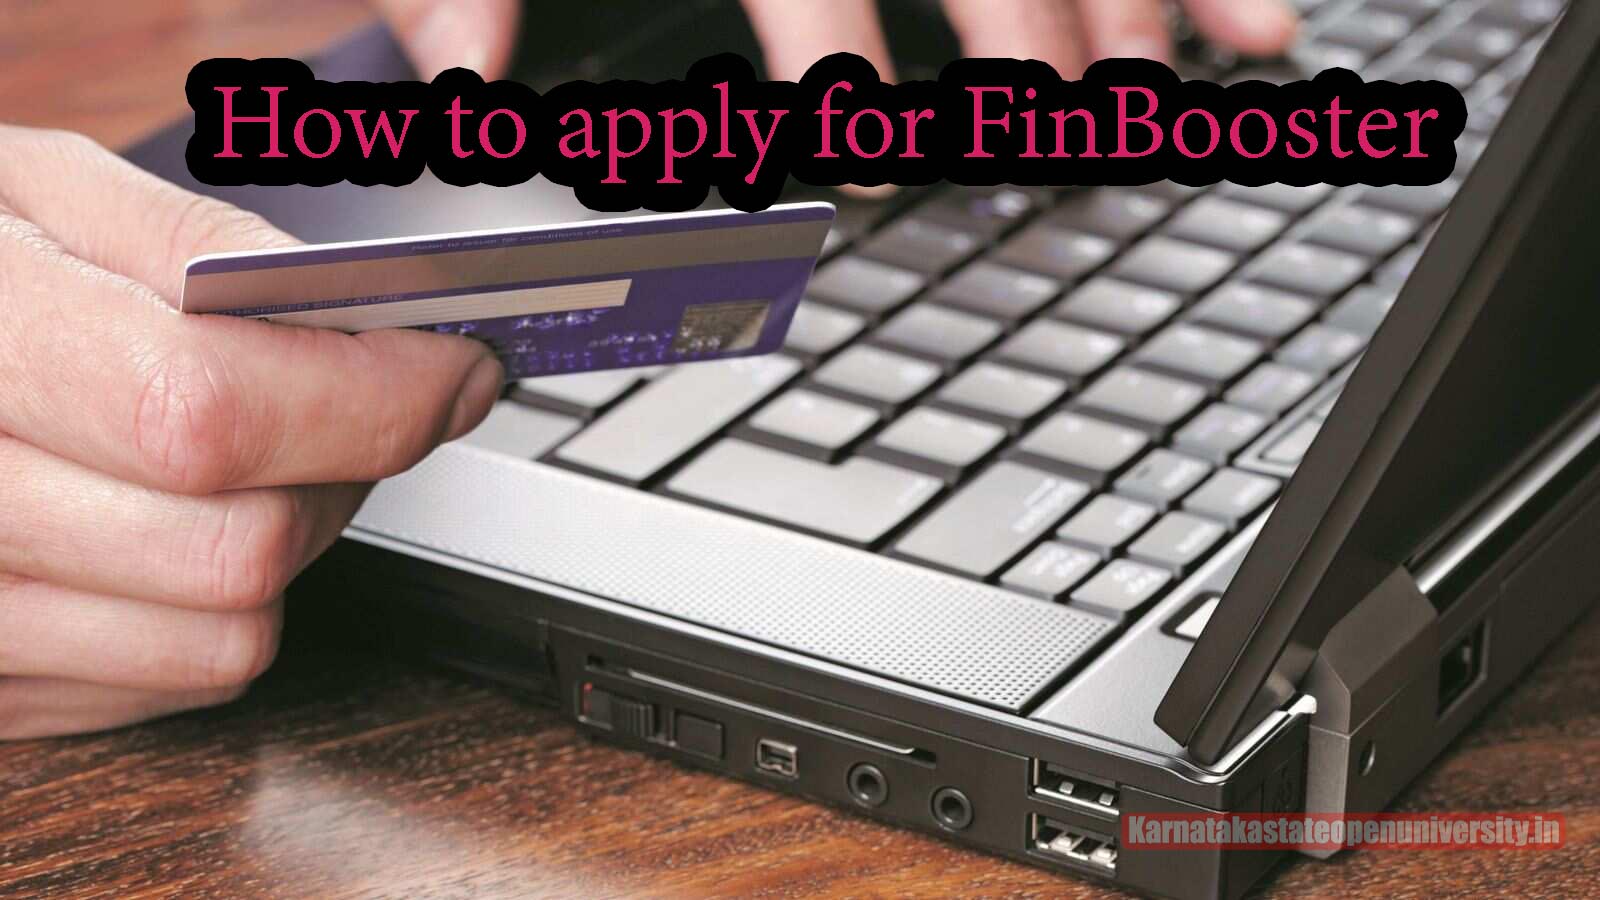 How to apply for FinBooster